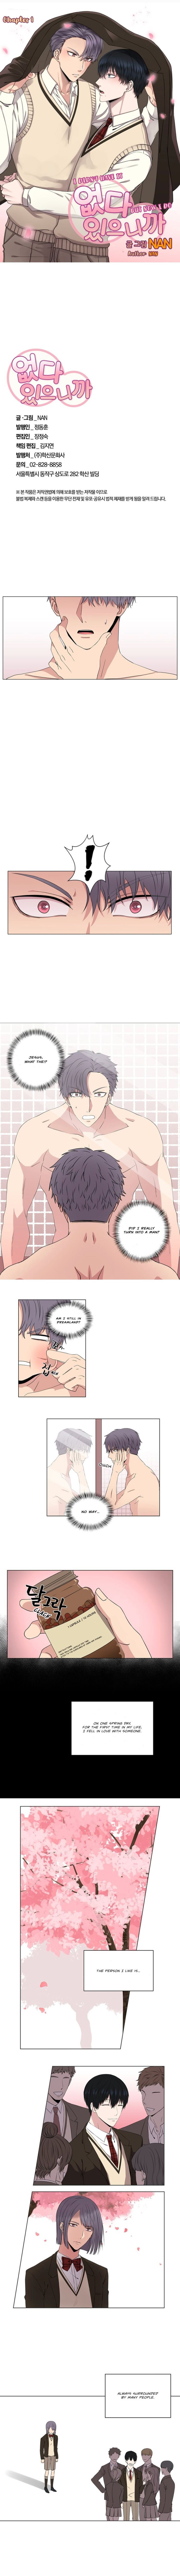 What Do I Do Now Manhwa I didn't have it but now I do Ch.1 Page 1 - Mangago